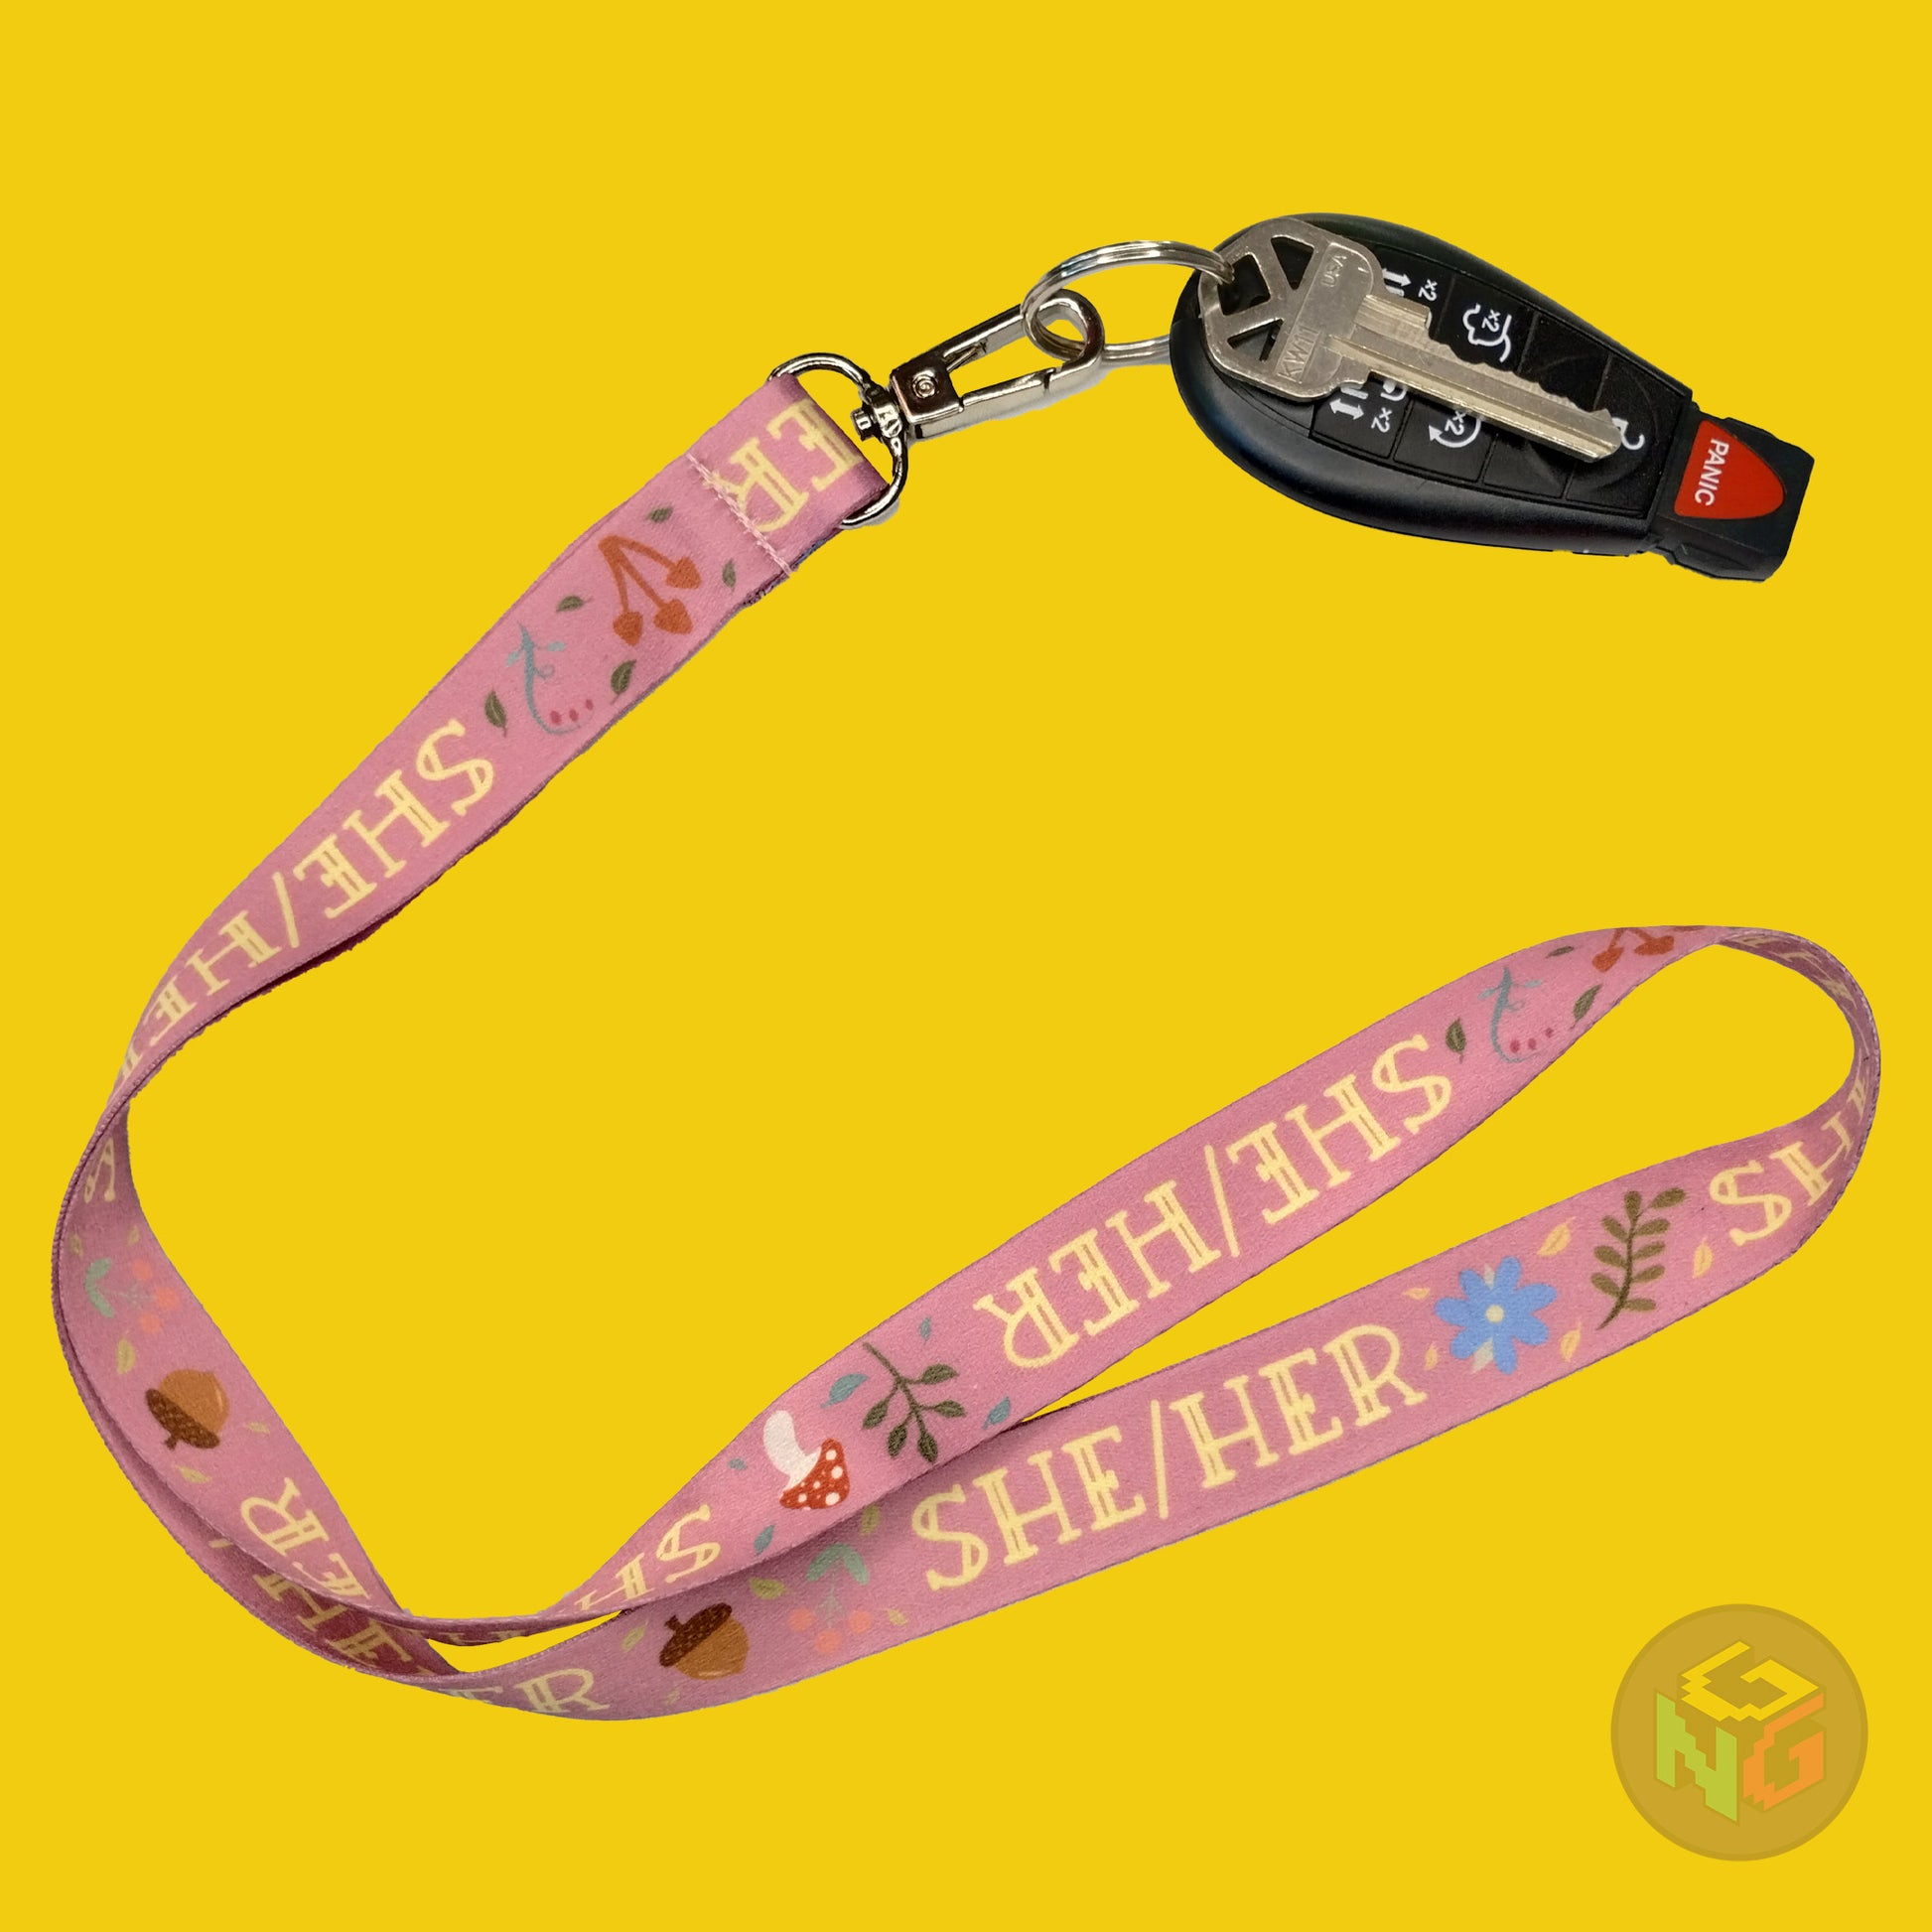 pink she her pronoun lanyard showing the yellow text, mushrooms, leaves, and flower details with a key fob clipped to the end of the lanyard